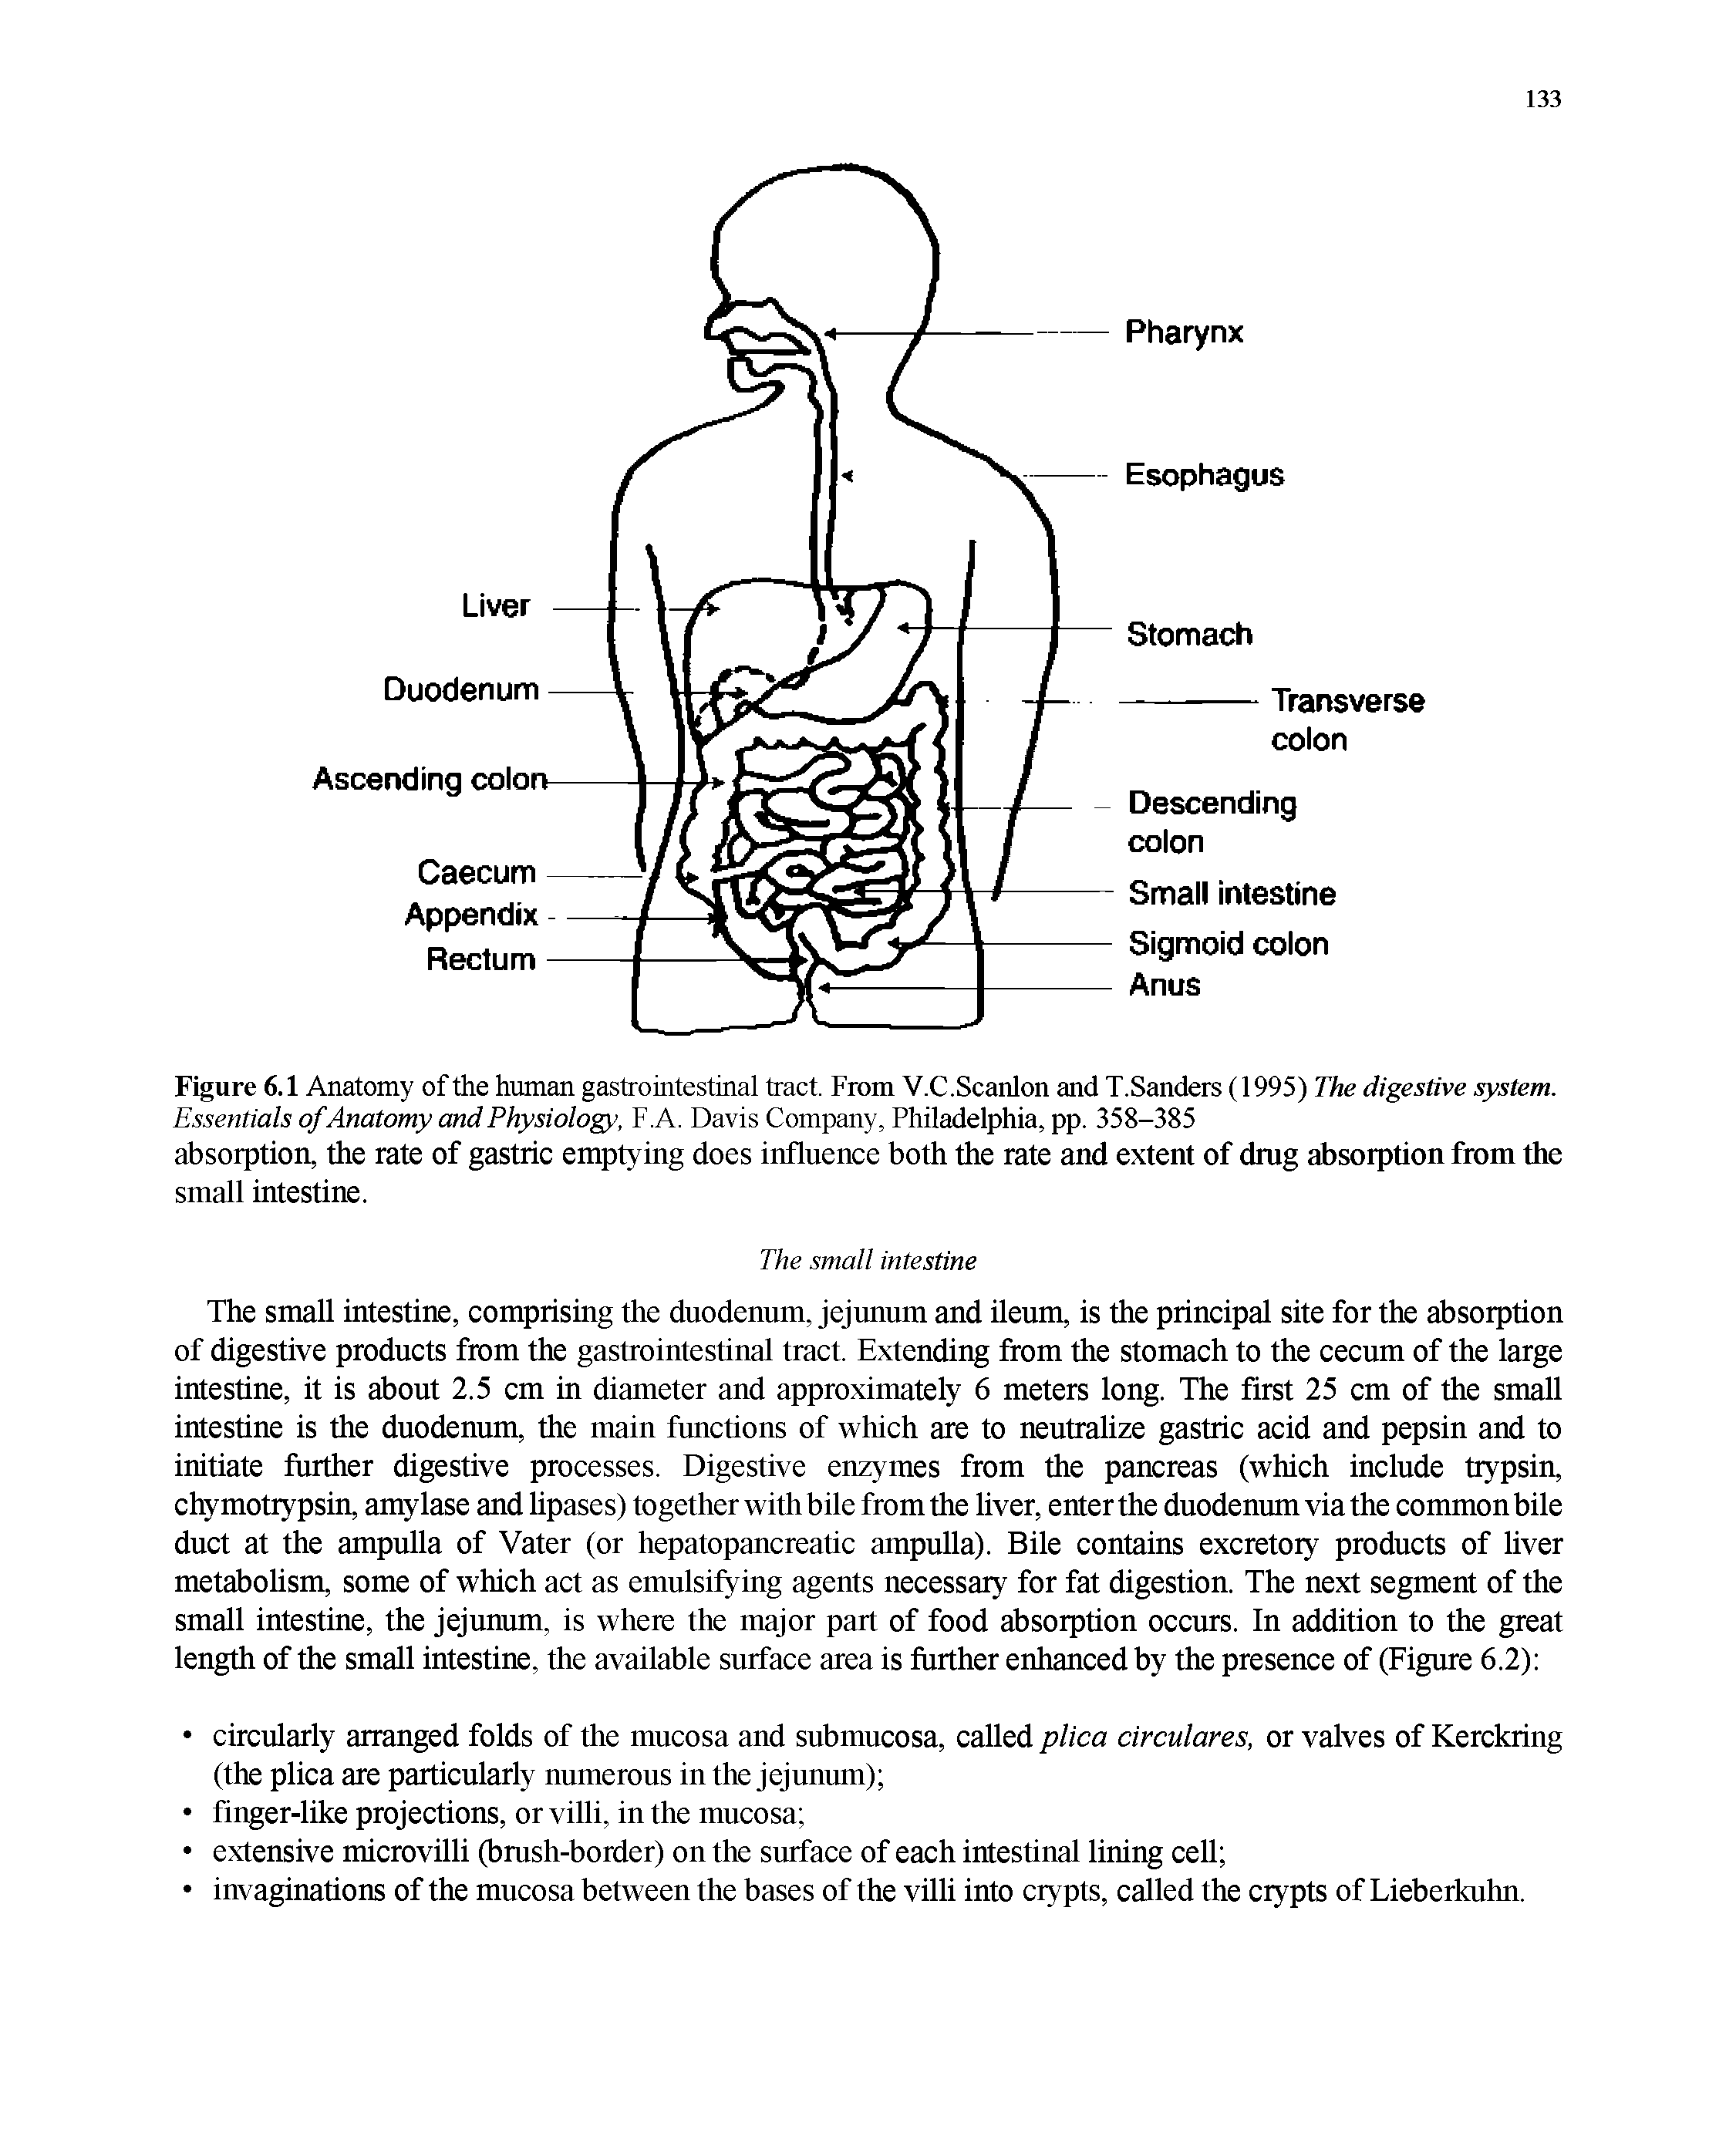 Figure 6.1 Anatomy of the human gastrointestinal tract. From V.C.Scanlon and T.Sanders (1995) The digestive system. Essentials of Anatomy and Physiology, F.A. Davis Company, Philadelphia, pp. 358-385...